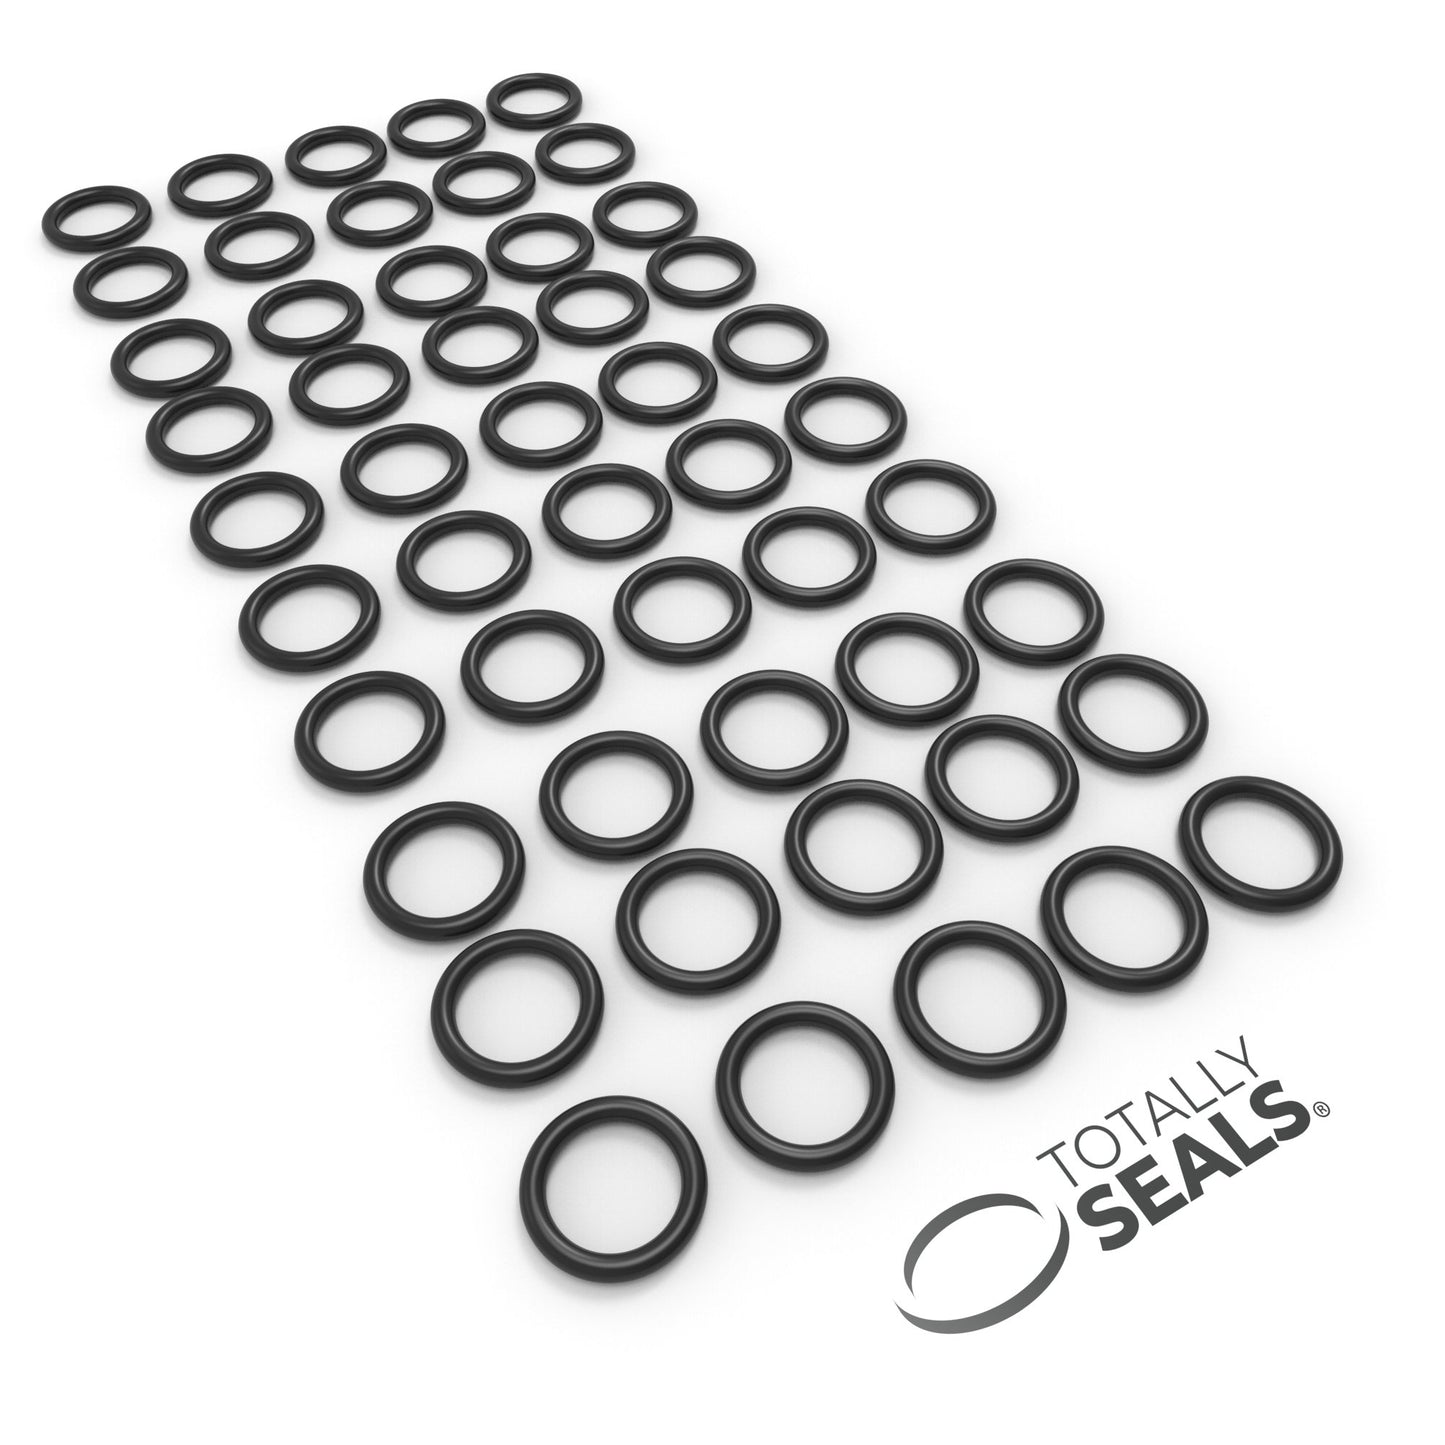 46mm x 4mm (54mm OD) Nitrile O-Rings - Totally Seals®